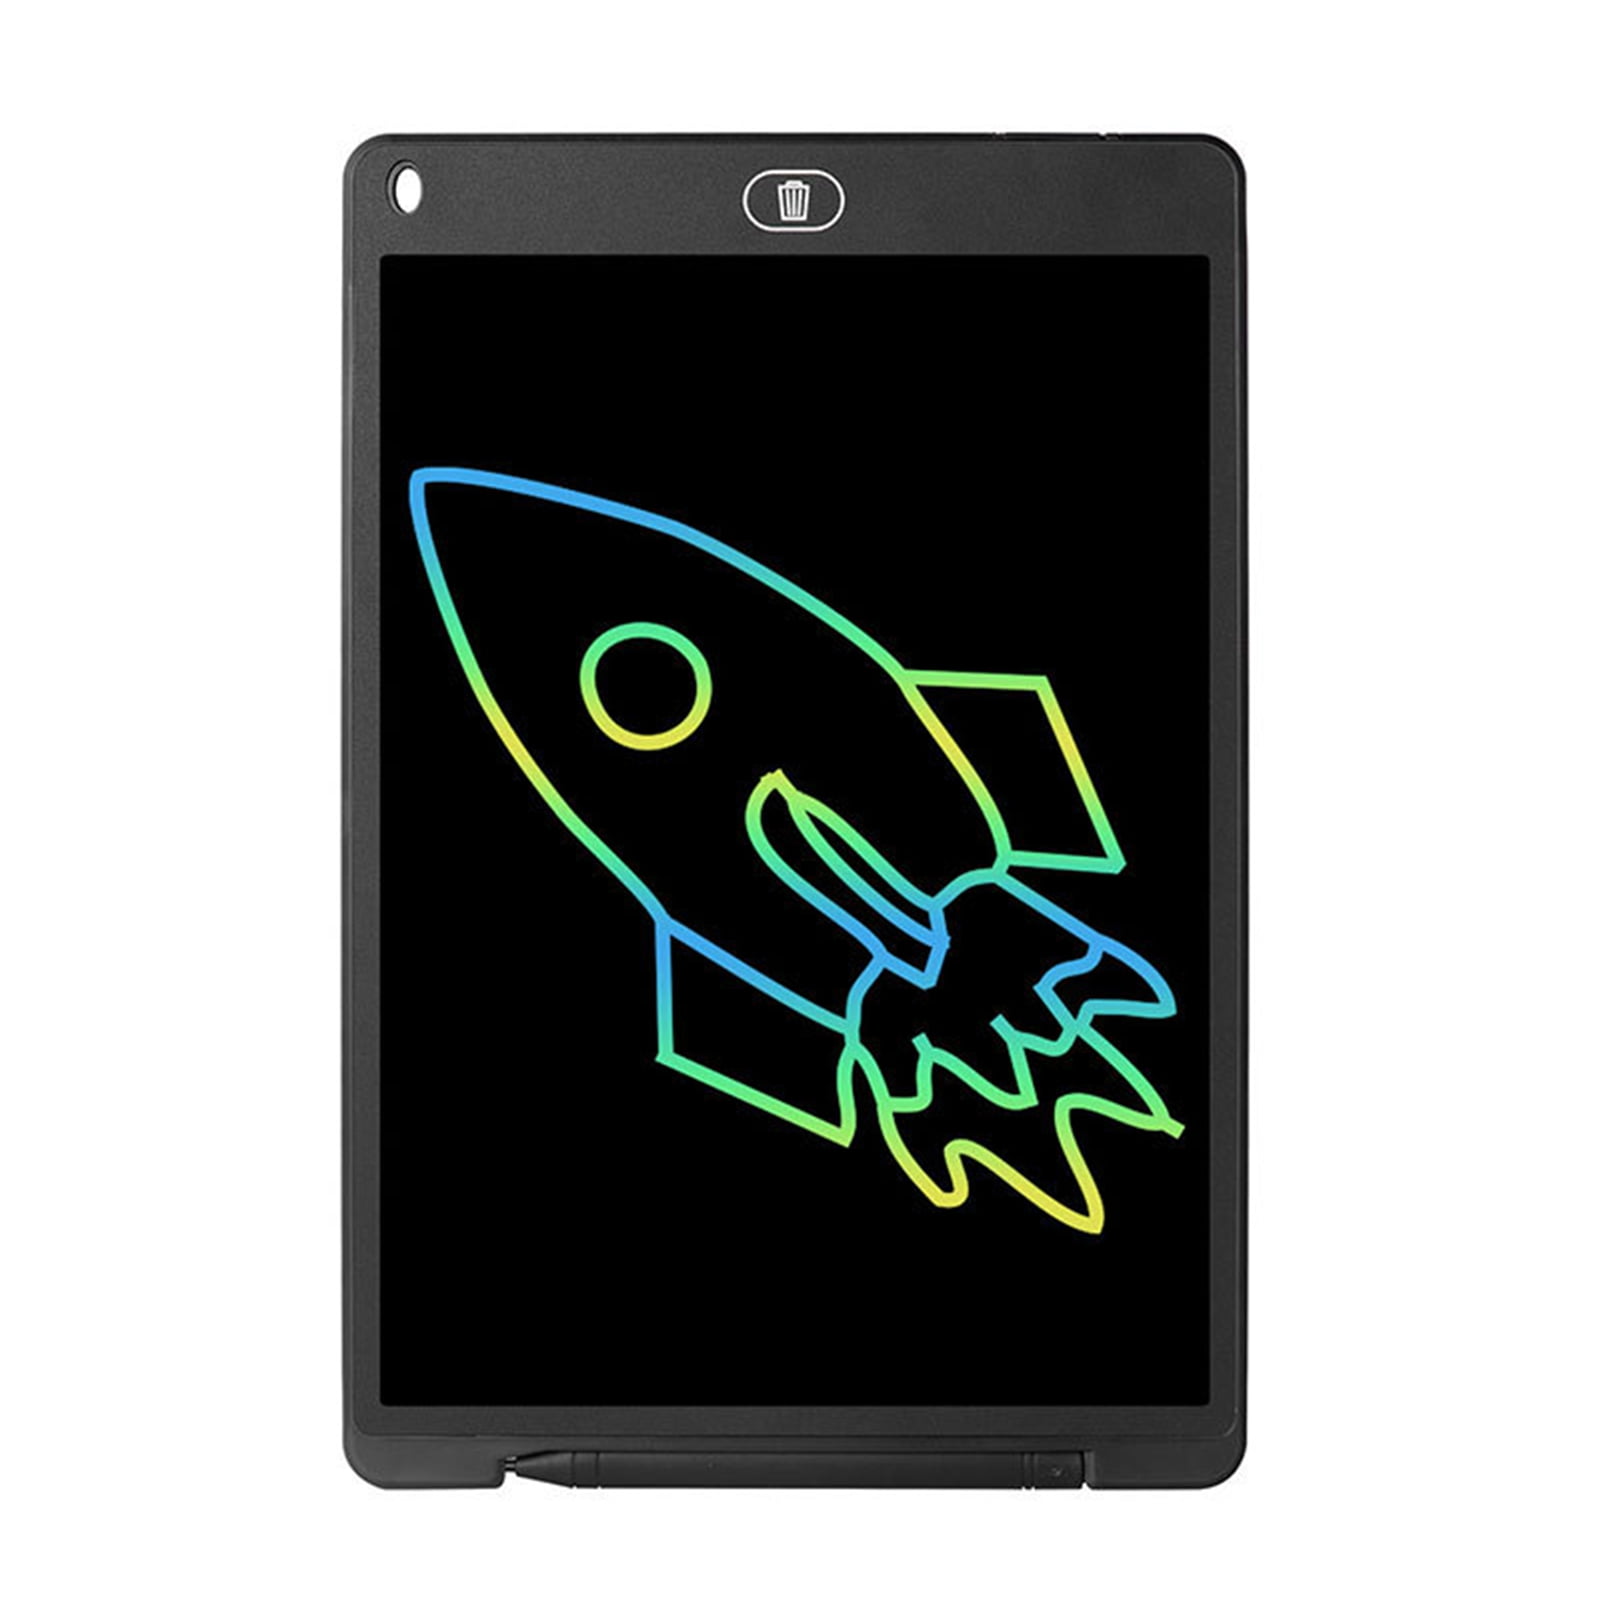 Richgv LCD Writing Tablet, 12 Inches Light Drawing Business Board Built-in  Screen Lock & Magnet for Kids and Adults Blue Doodle Board Drawing Pad